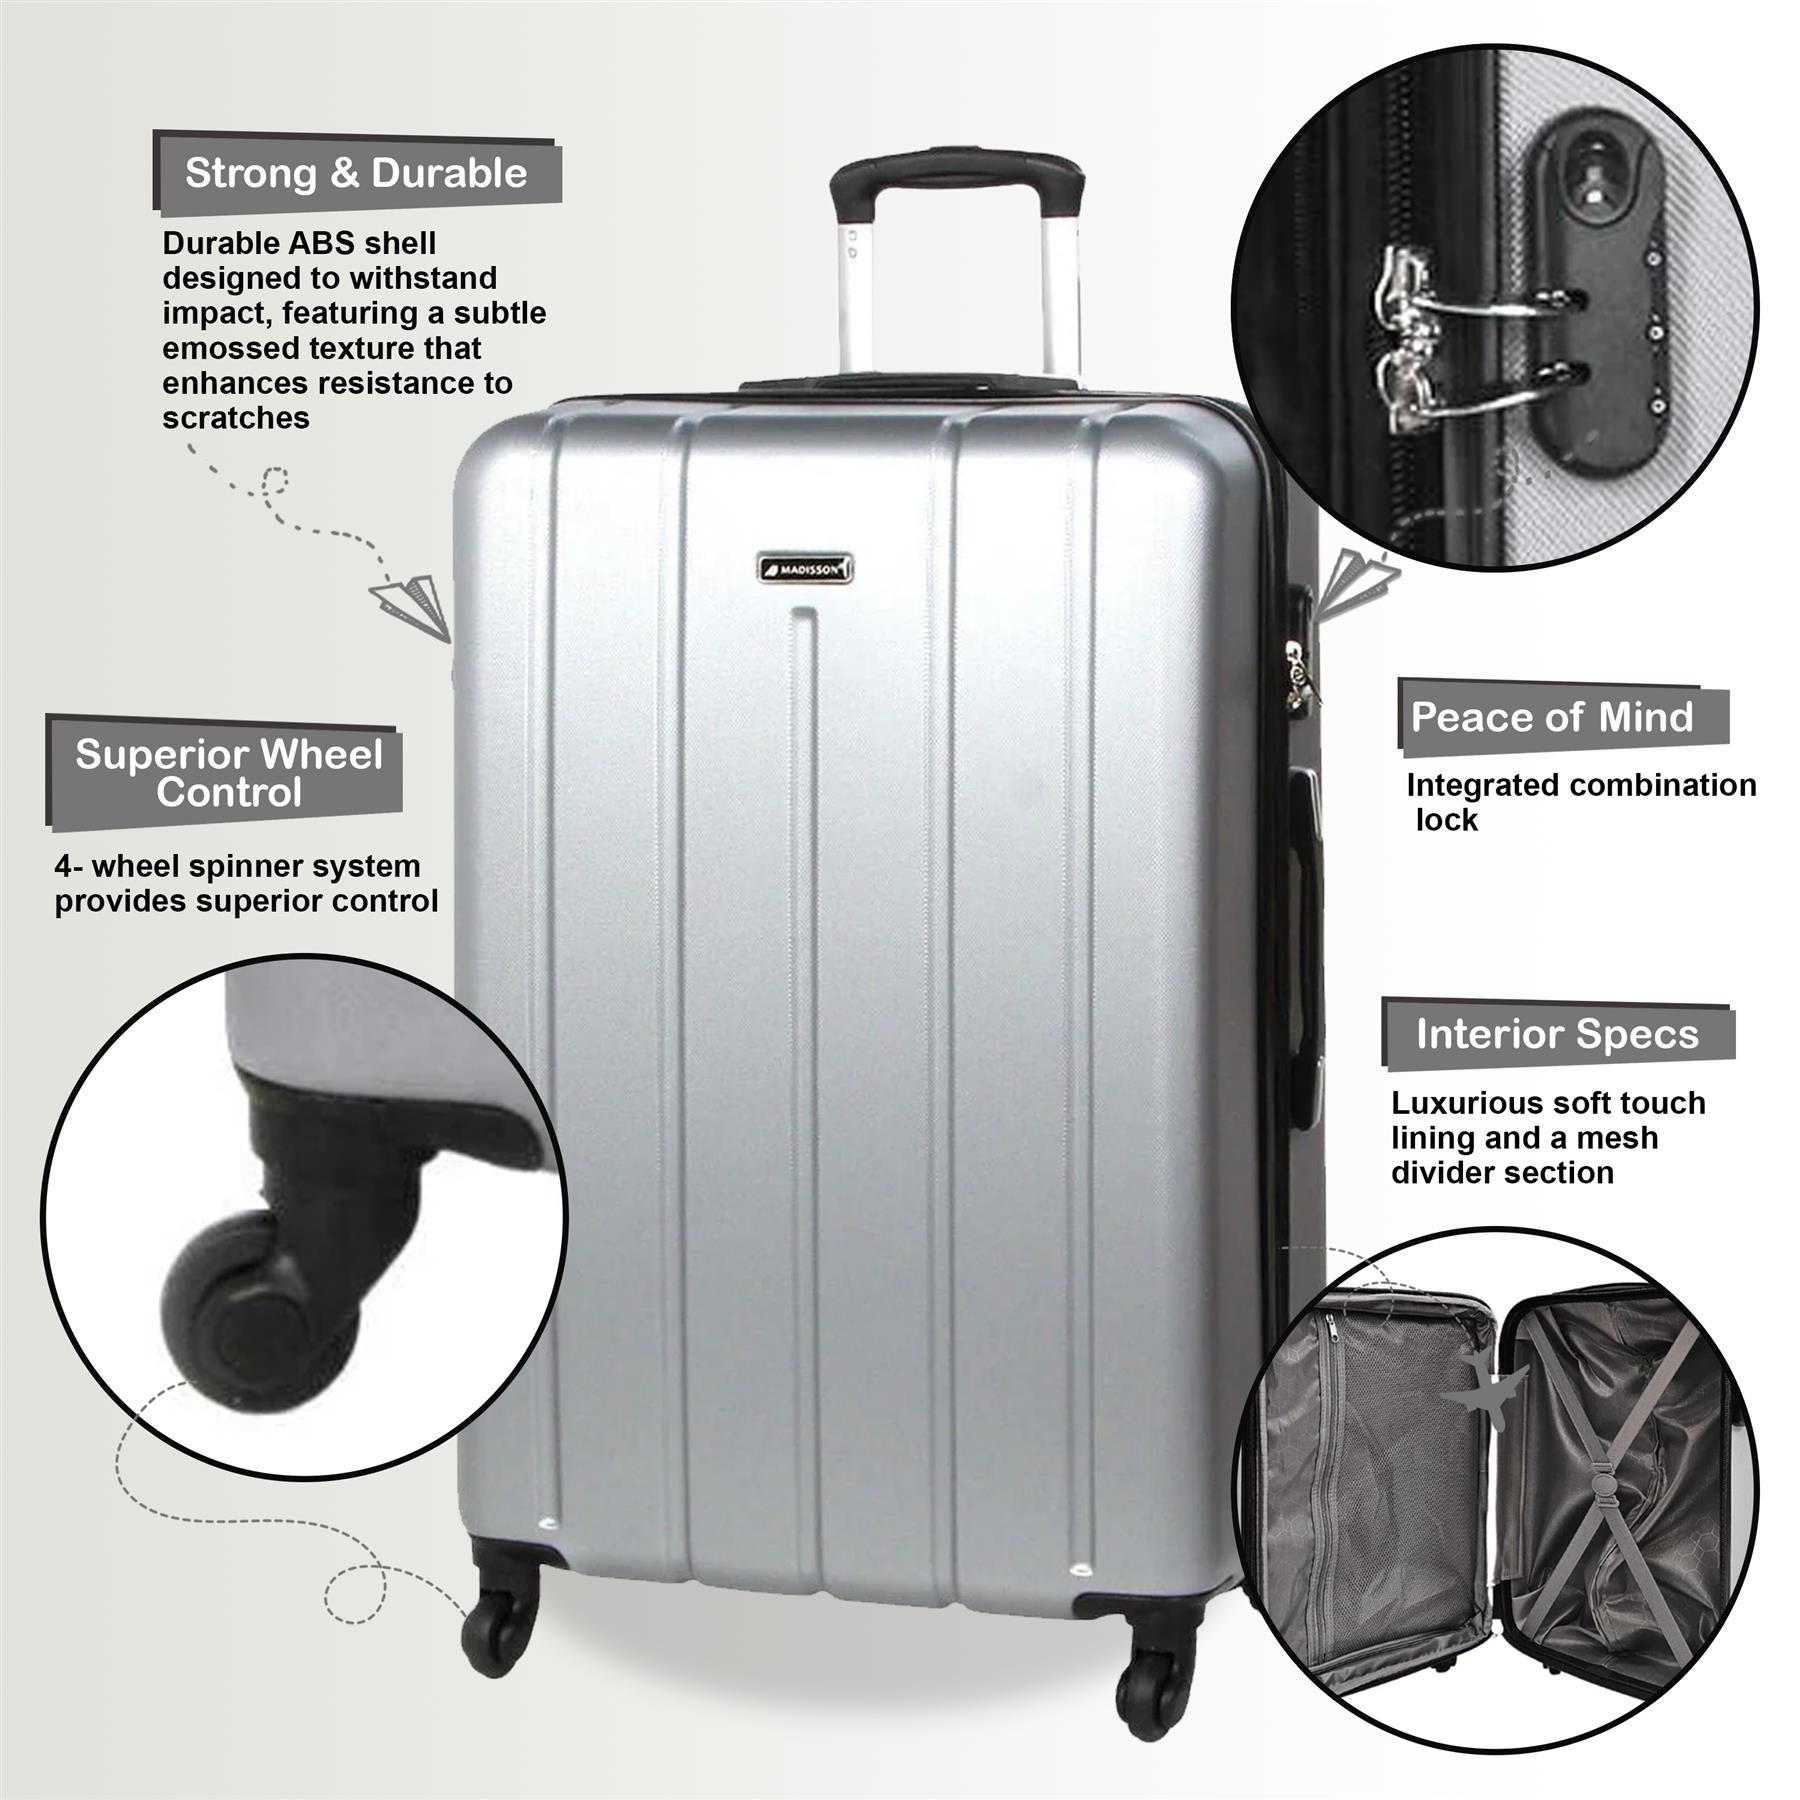 Castleberry Large Hard Shell Suitcase in Silver